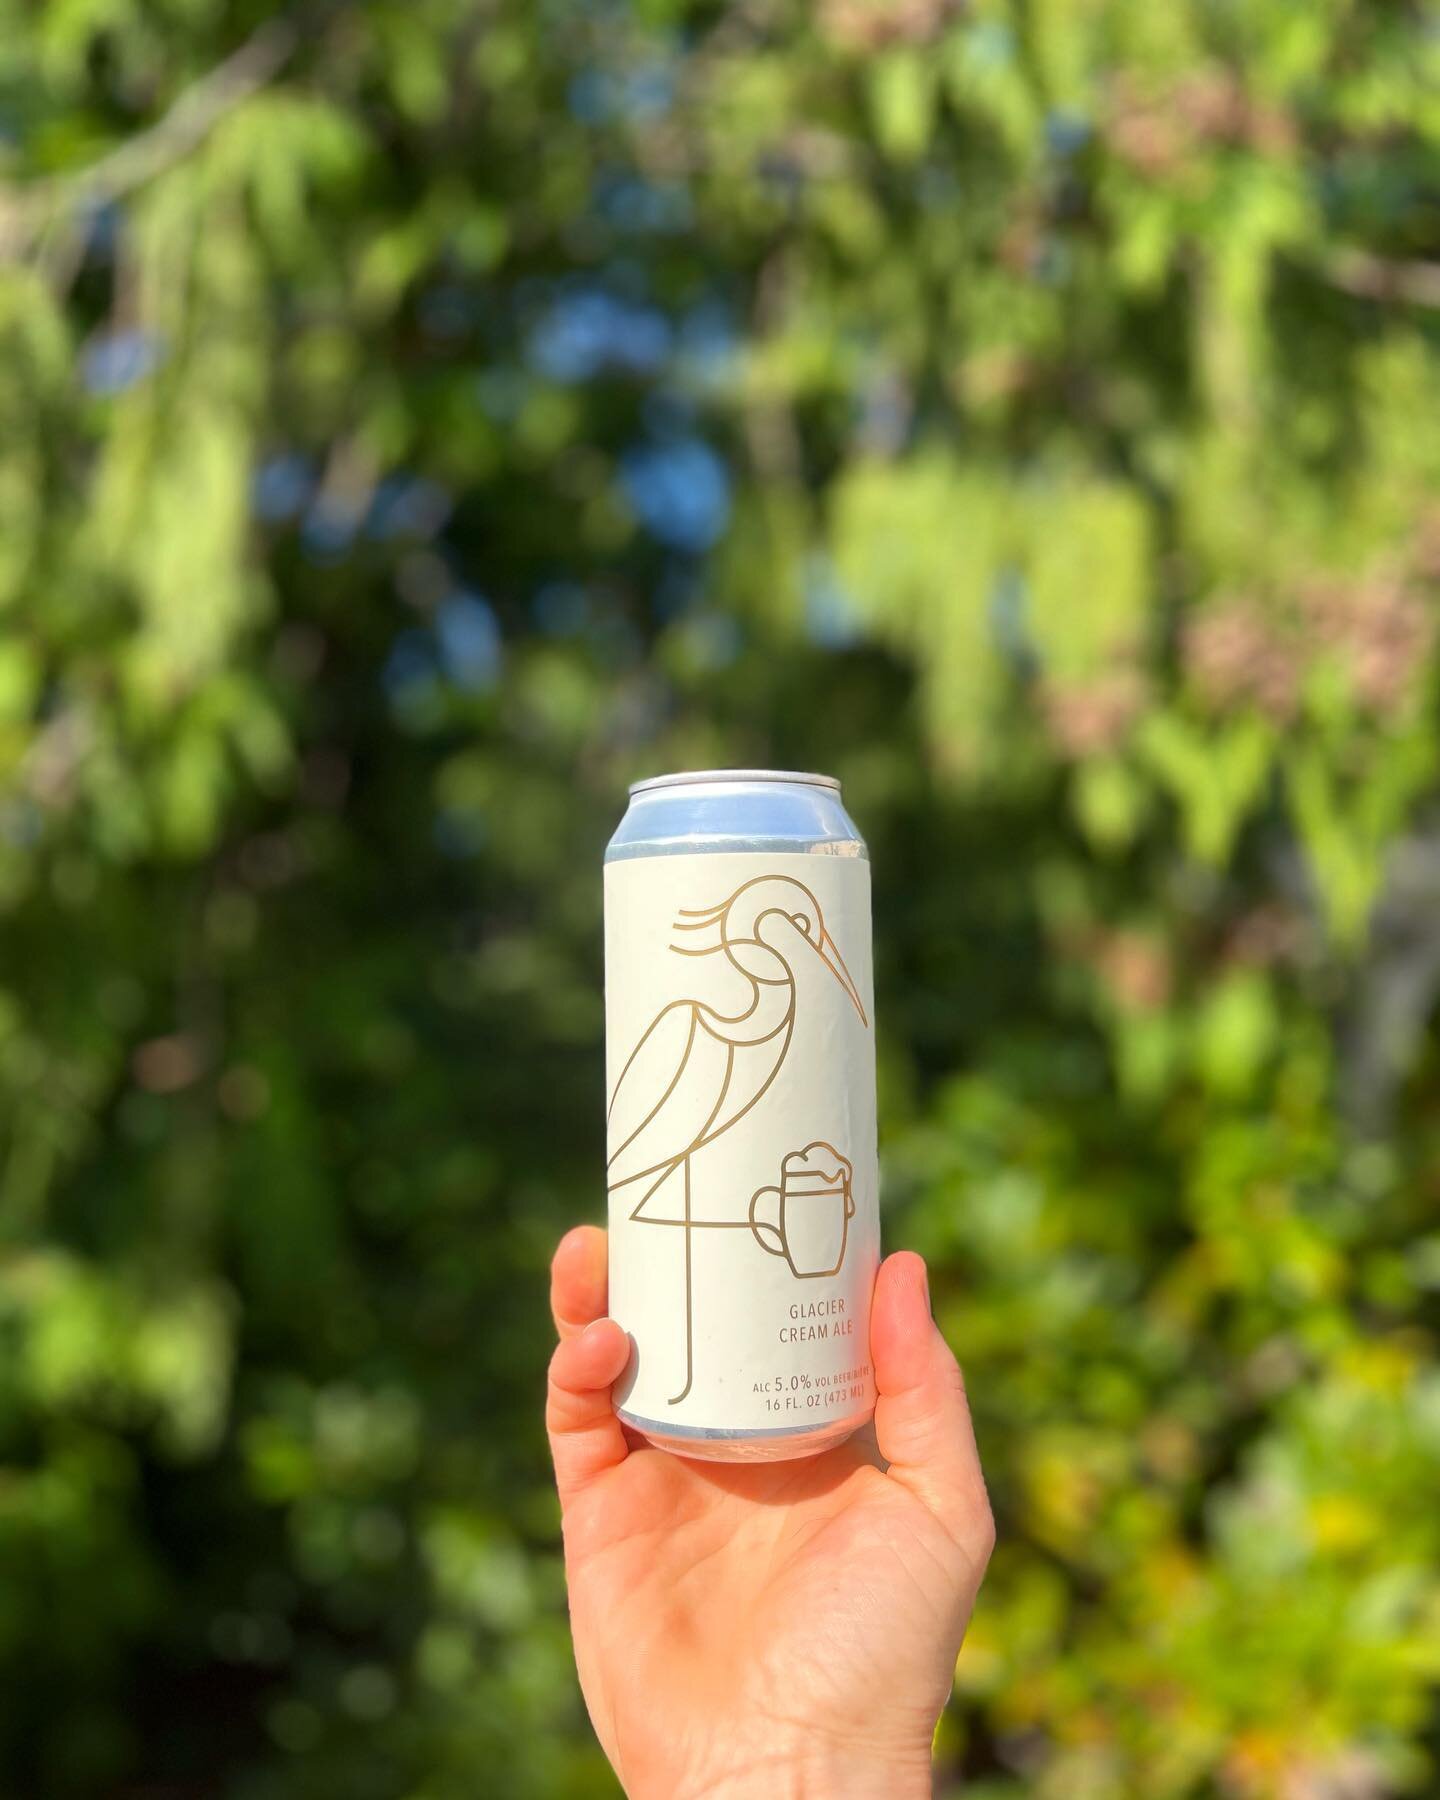 Glacier Cream Ale has a fresh look! 
.
Thanks to @cariboucreative, all of our beers have a new fresh look with our heron front and centre. We love this new simple and sleek look with a moody palette. 
.
#freshlook #craftbeer #bcbeer #landandseabeer #